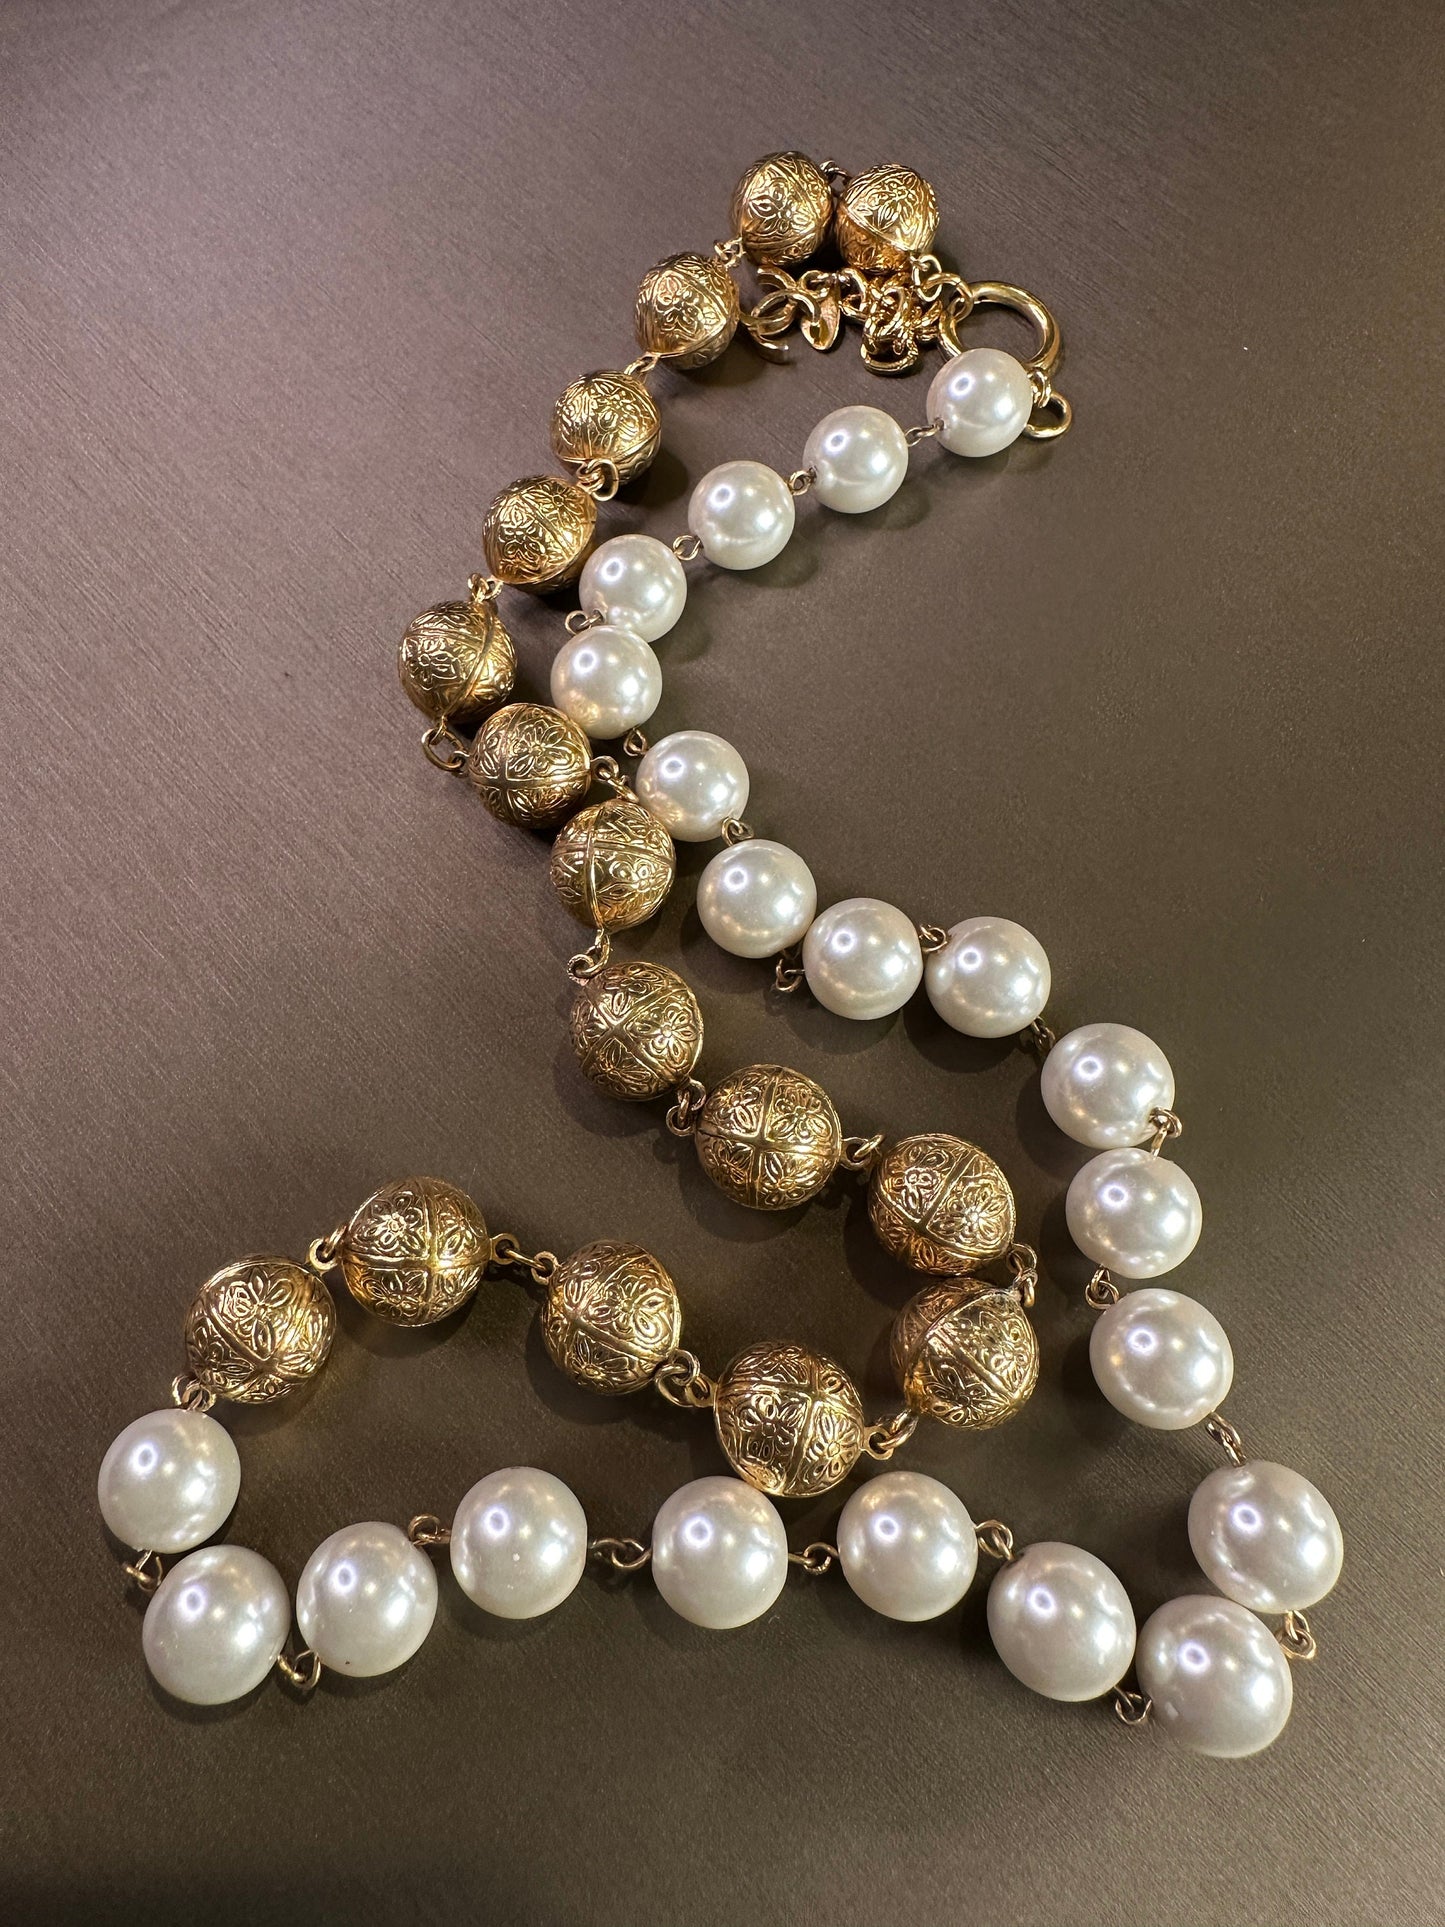 CHANEL VINTAGE 100% Authentic Genuine Faux Pearl Necklace, Gold Plated Metal, 1990's, Great Condition